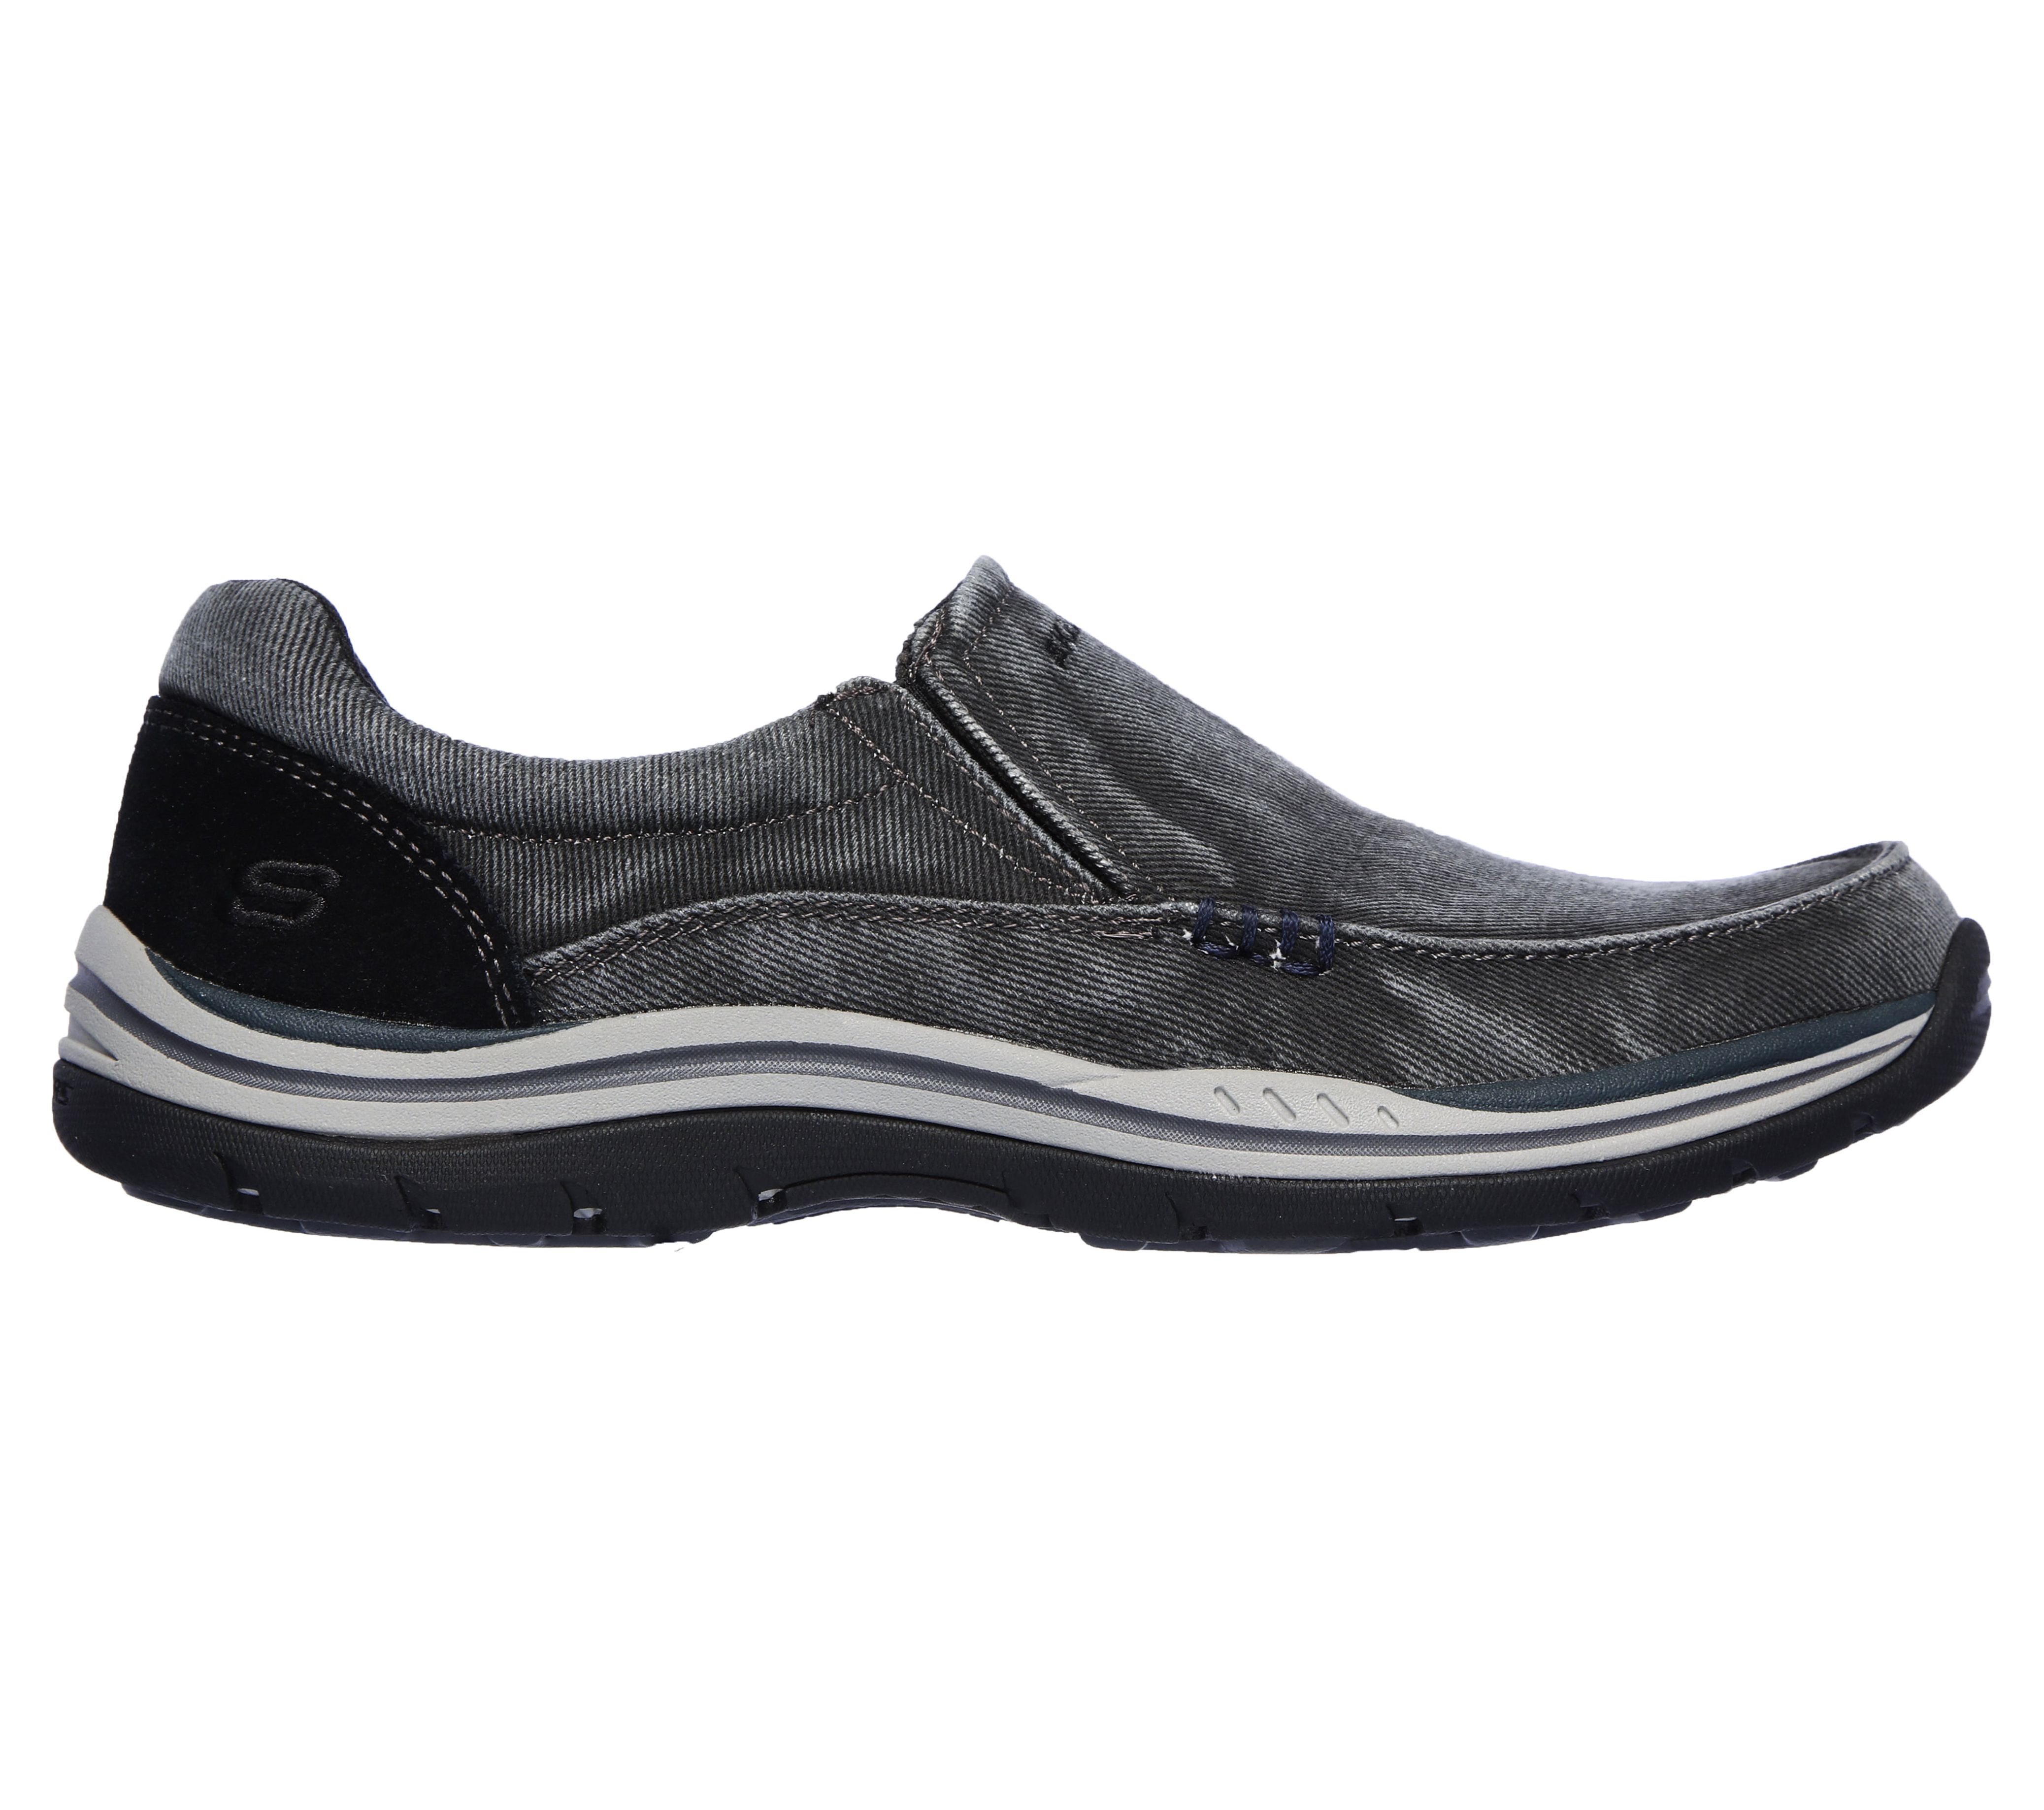 Skechers Men's Relaxed Fit Expected Avillo Casual Slip-on Shoe (Wide Width Available) - image 5 of 7